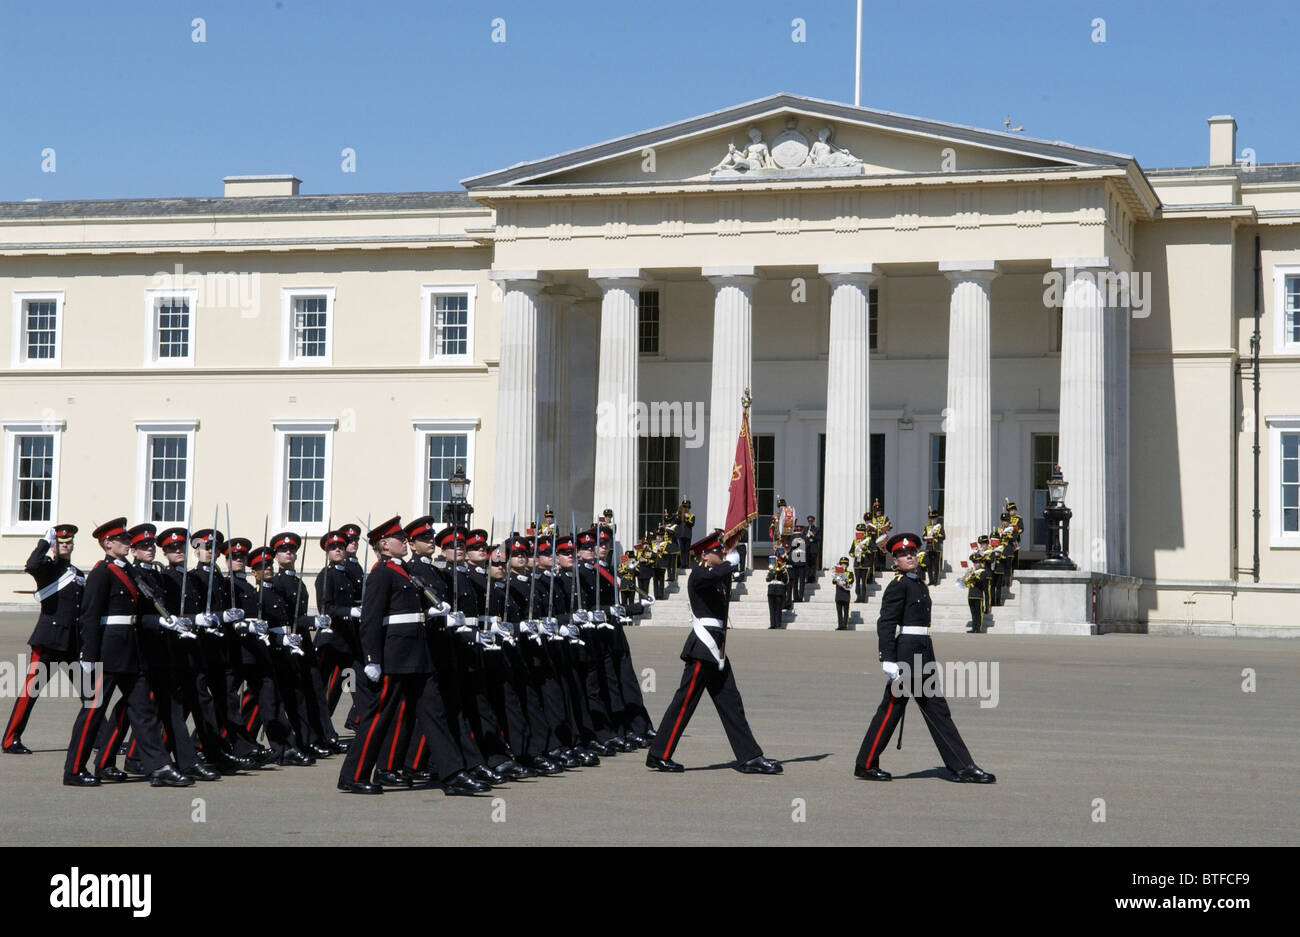 Officer cadets at the Passing Out Parade at Sandhurst Royal Military Academy, Surrey, UK Stock Photo